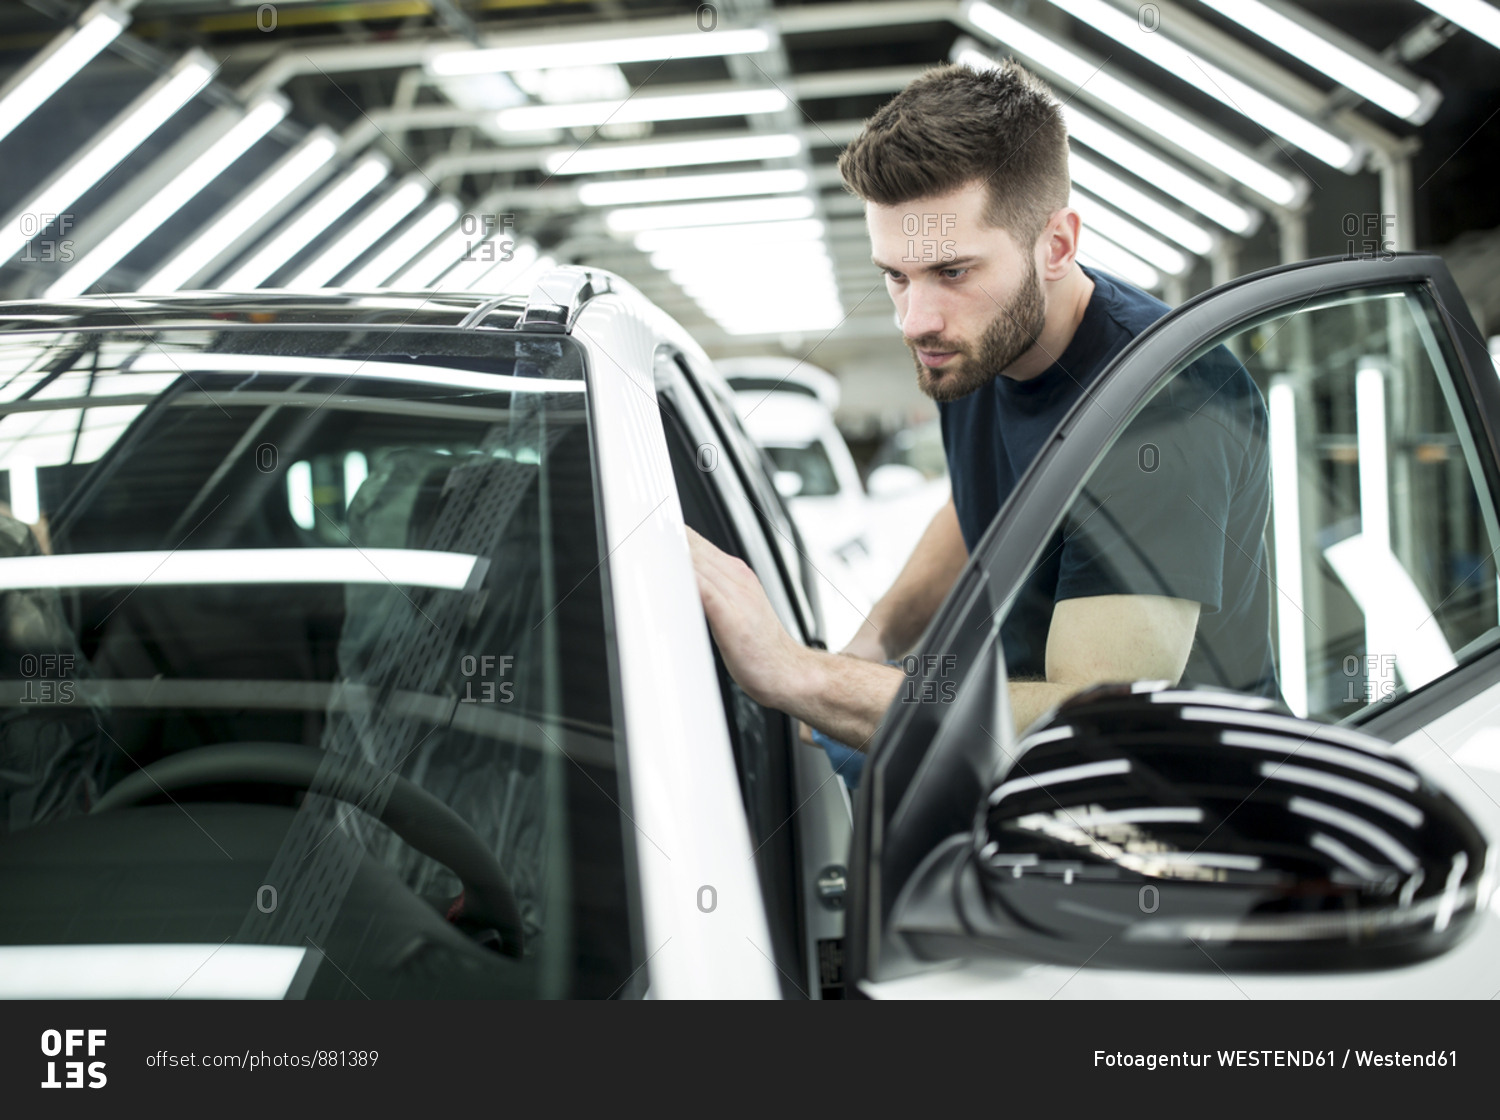 Man working in modern car factory wiping finished car